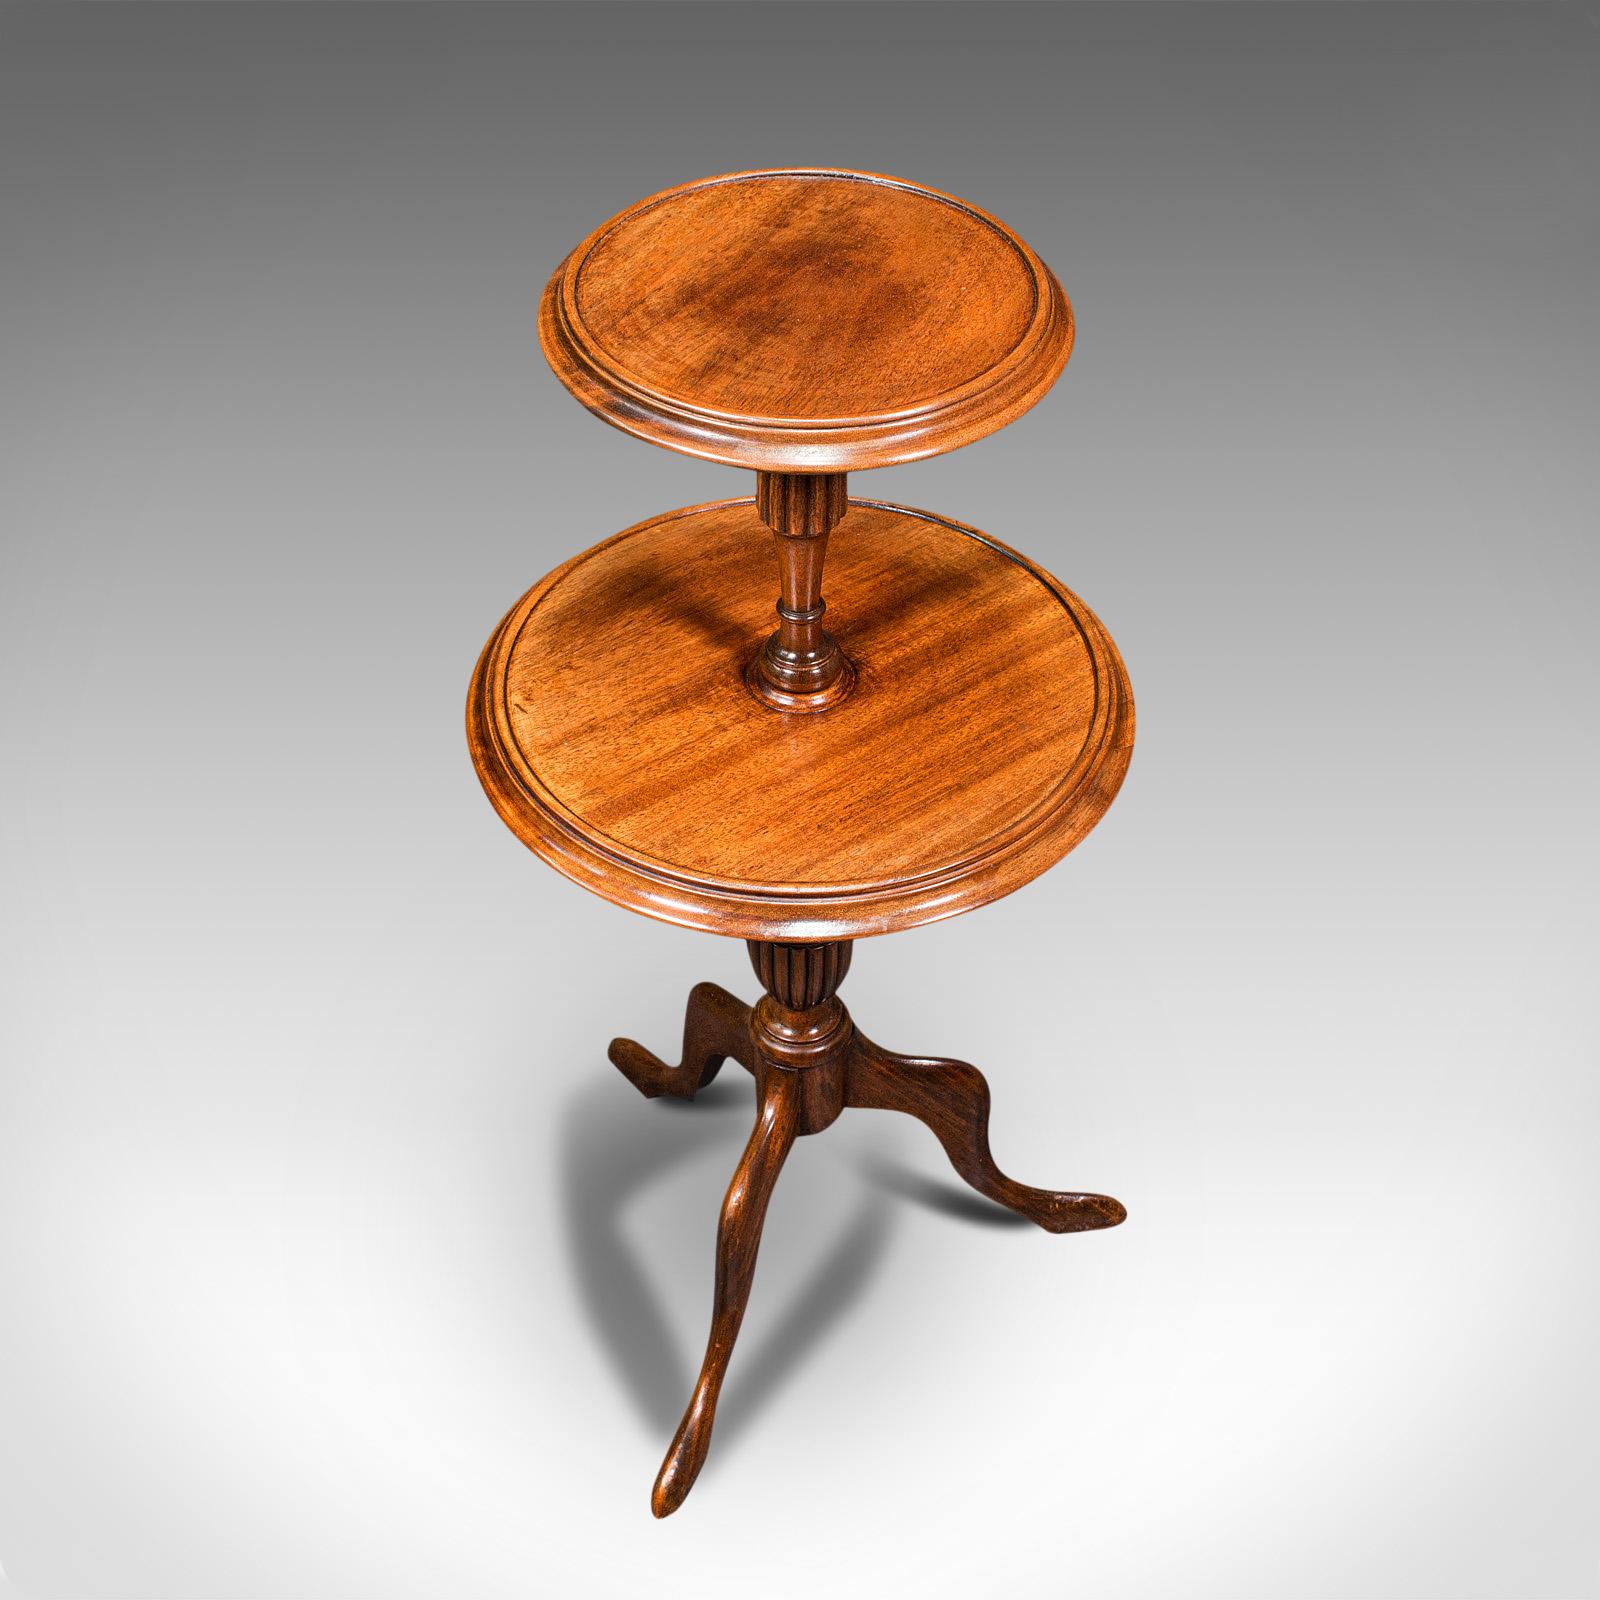 Antique Two Tier Table, English, Mahogany, Afternoon Tea, Cake Stand, Edwardian In Good Condition In Hele, Devon, GB